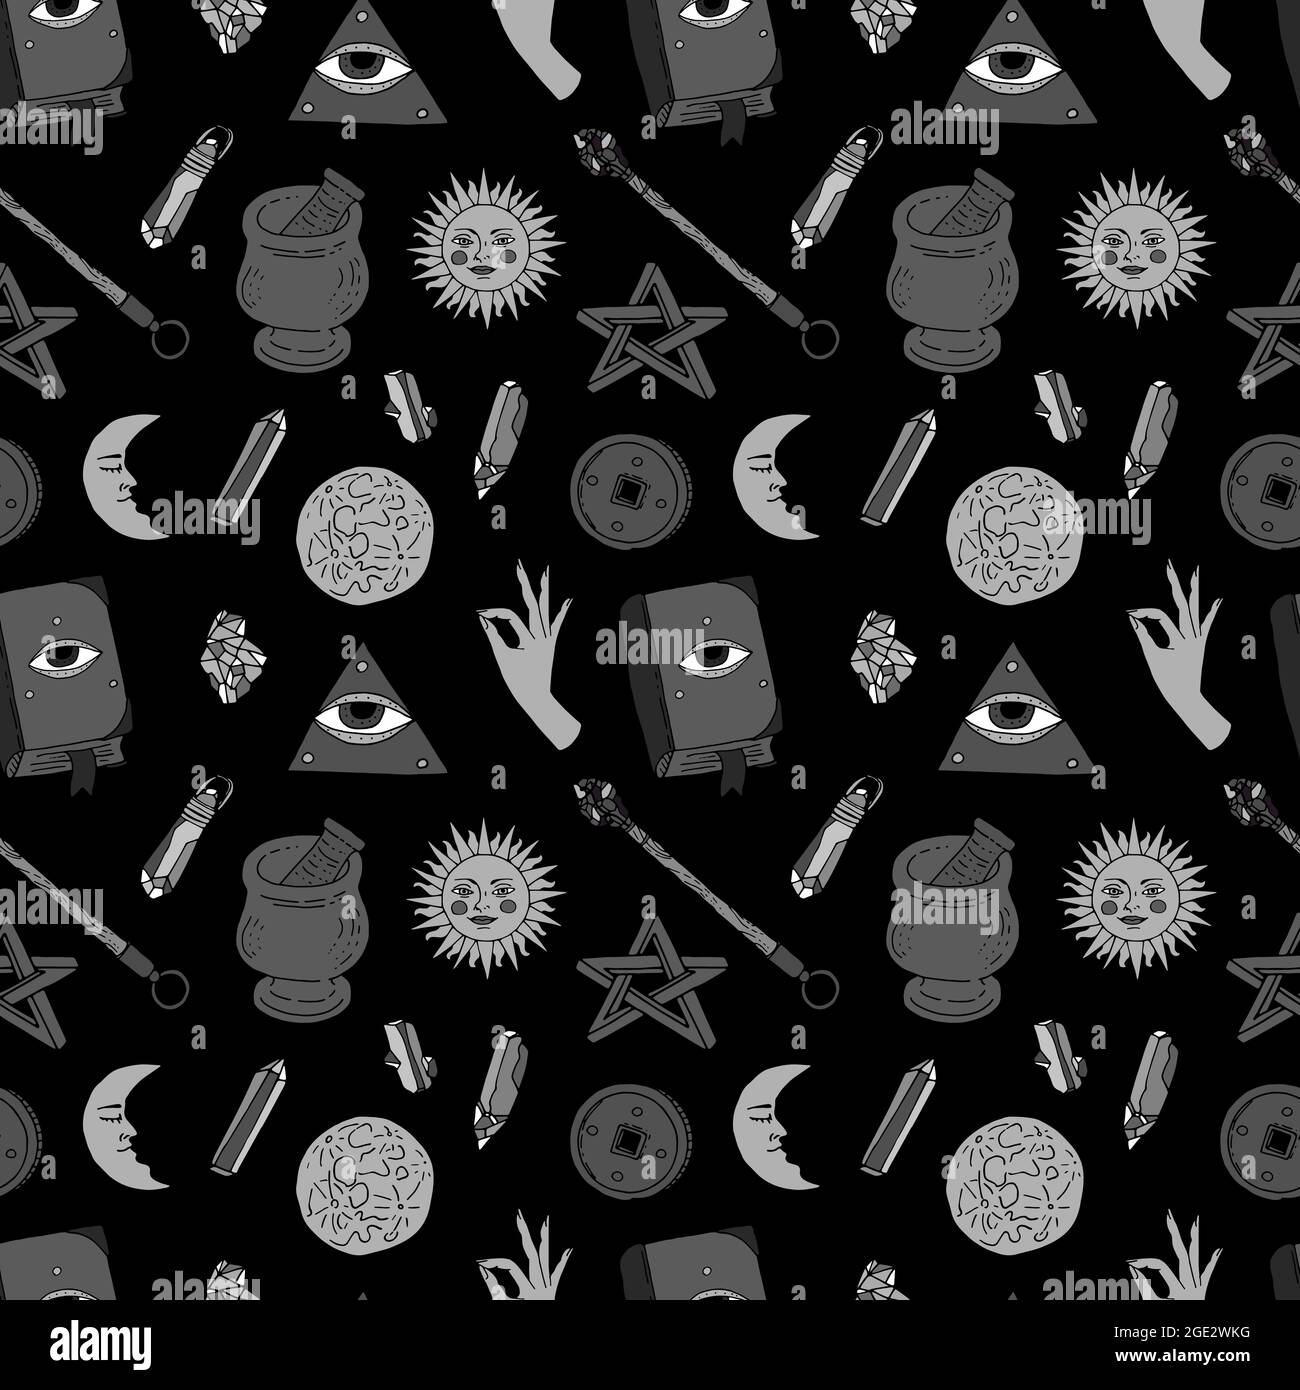 https://c8.alamy.com/comp/2GE2WKG/seamless-pattern-with-hand-drawn-doodle-line-art-celestial-bodies-and-magic-items-monochrome-spiritual-mystic-repeat-texture-2GE2WKG.jpg